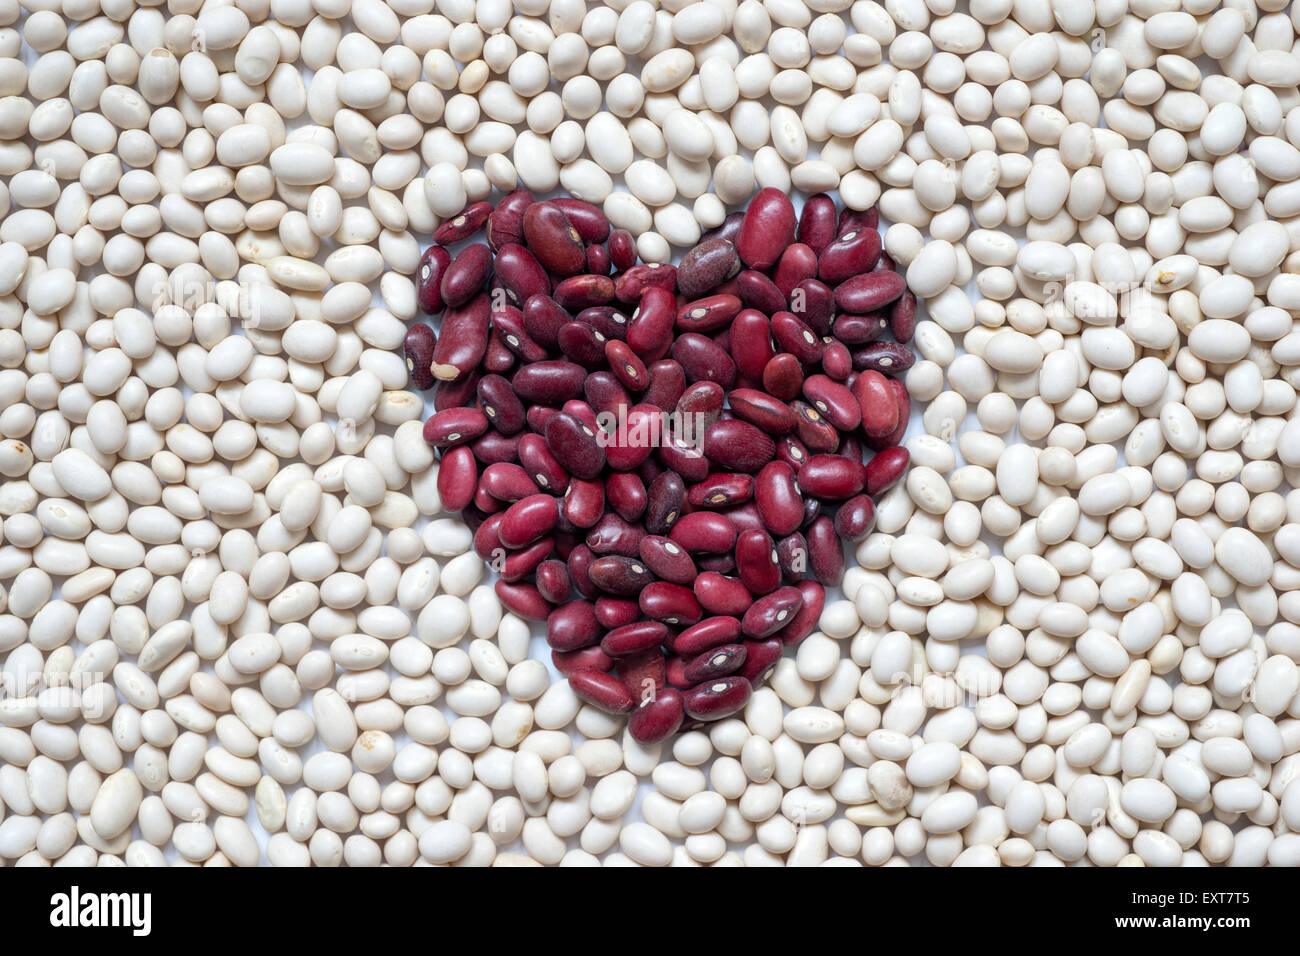 red and white kidney beans background with shape of heart Stock Photo